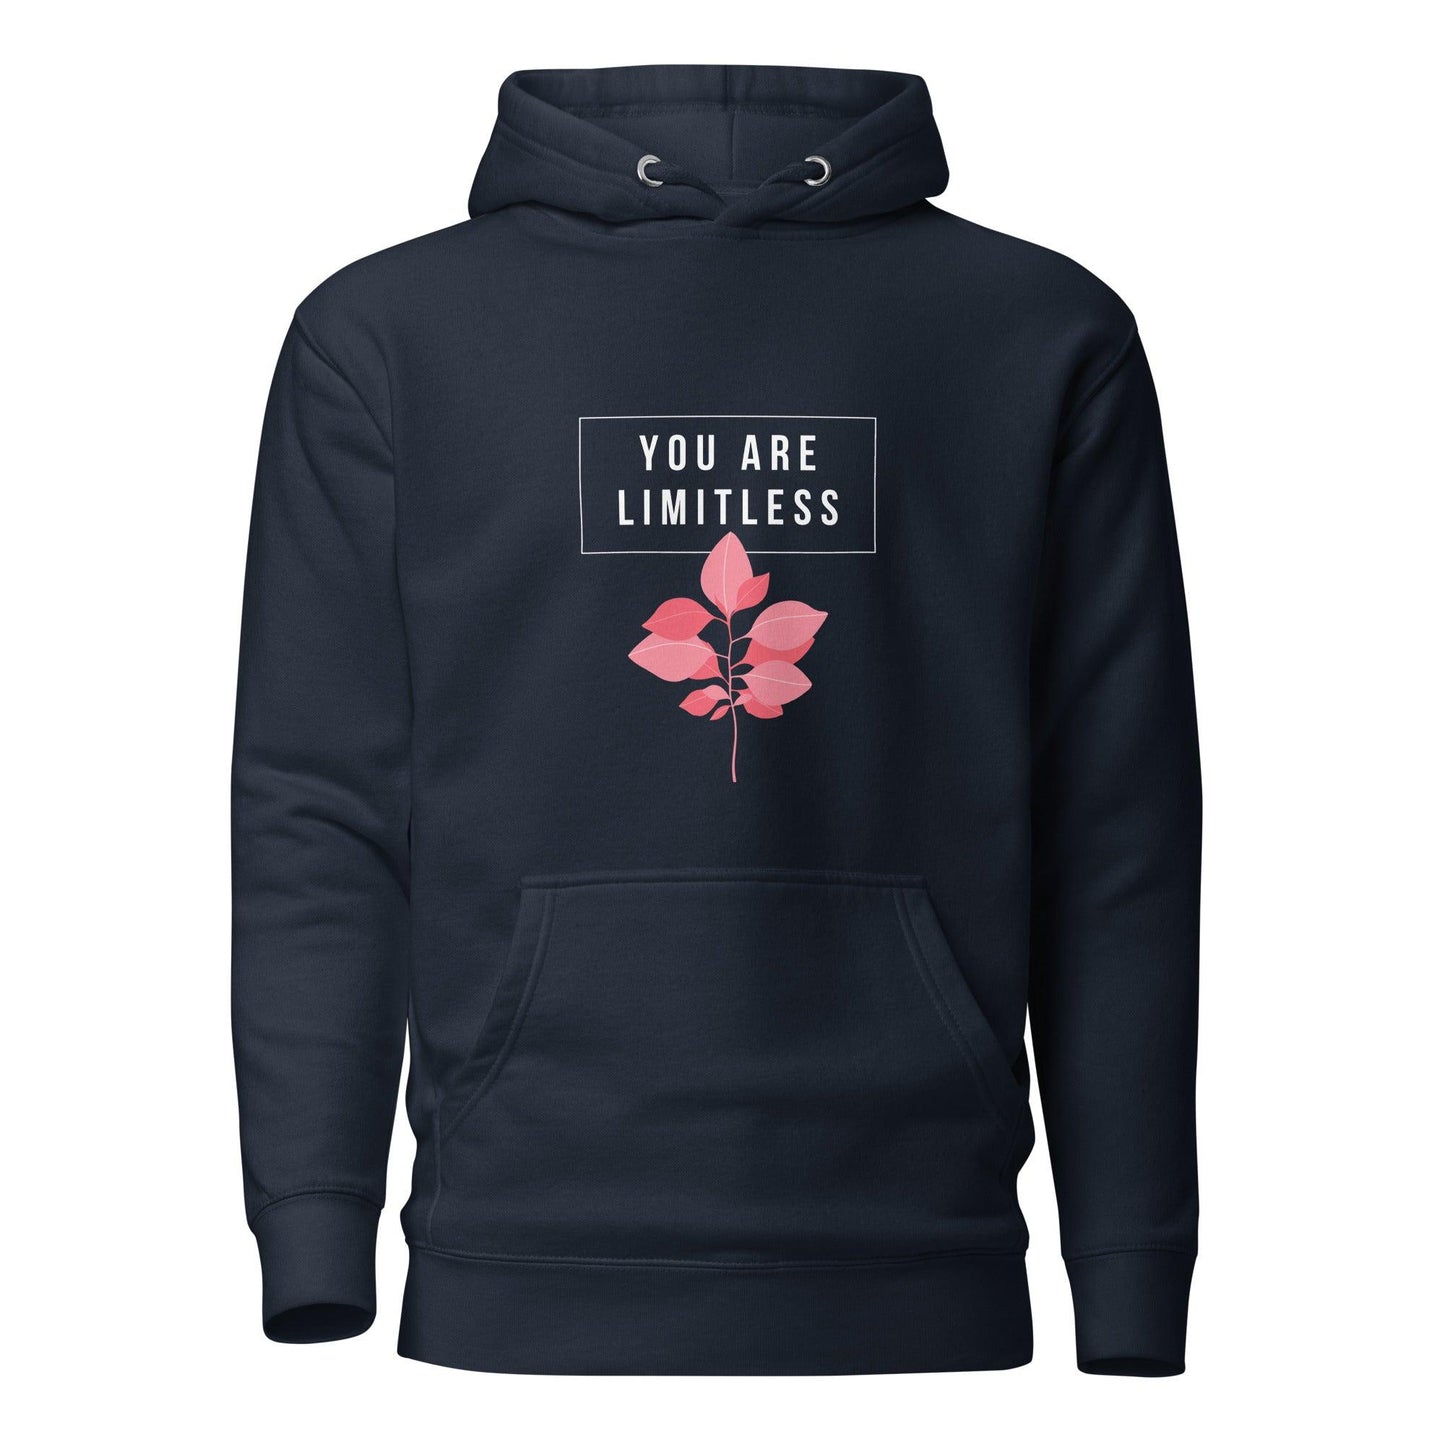 You Are Limitless Unisex Hoodie | Positive Affirmation Clothing - Affirm Effect